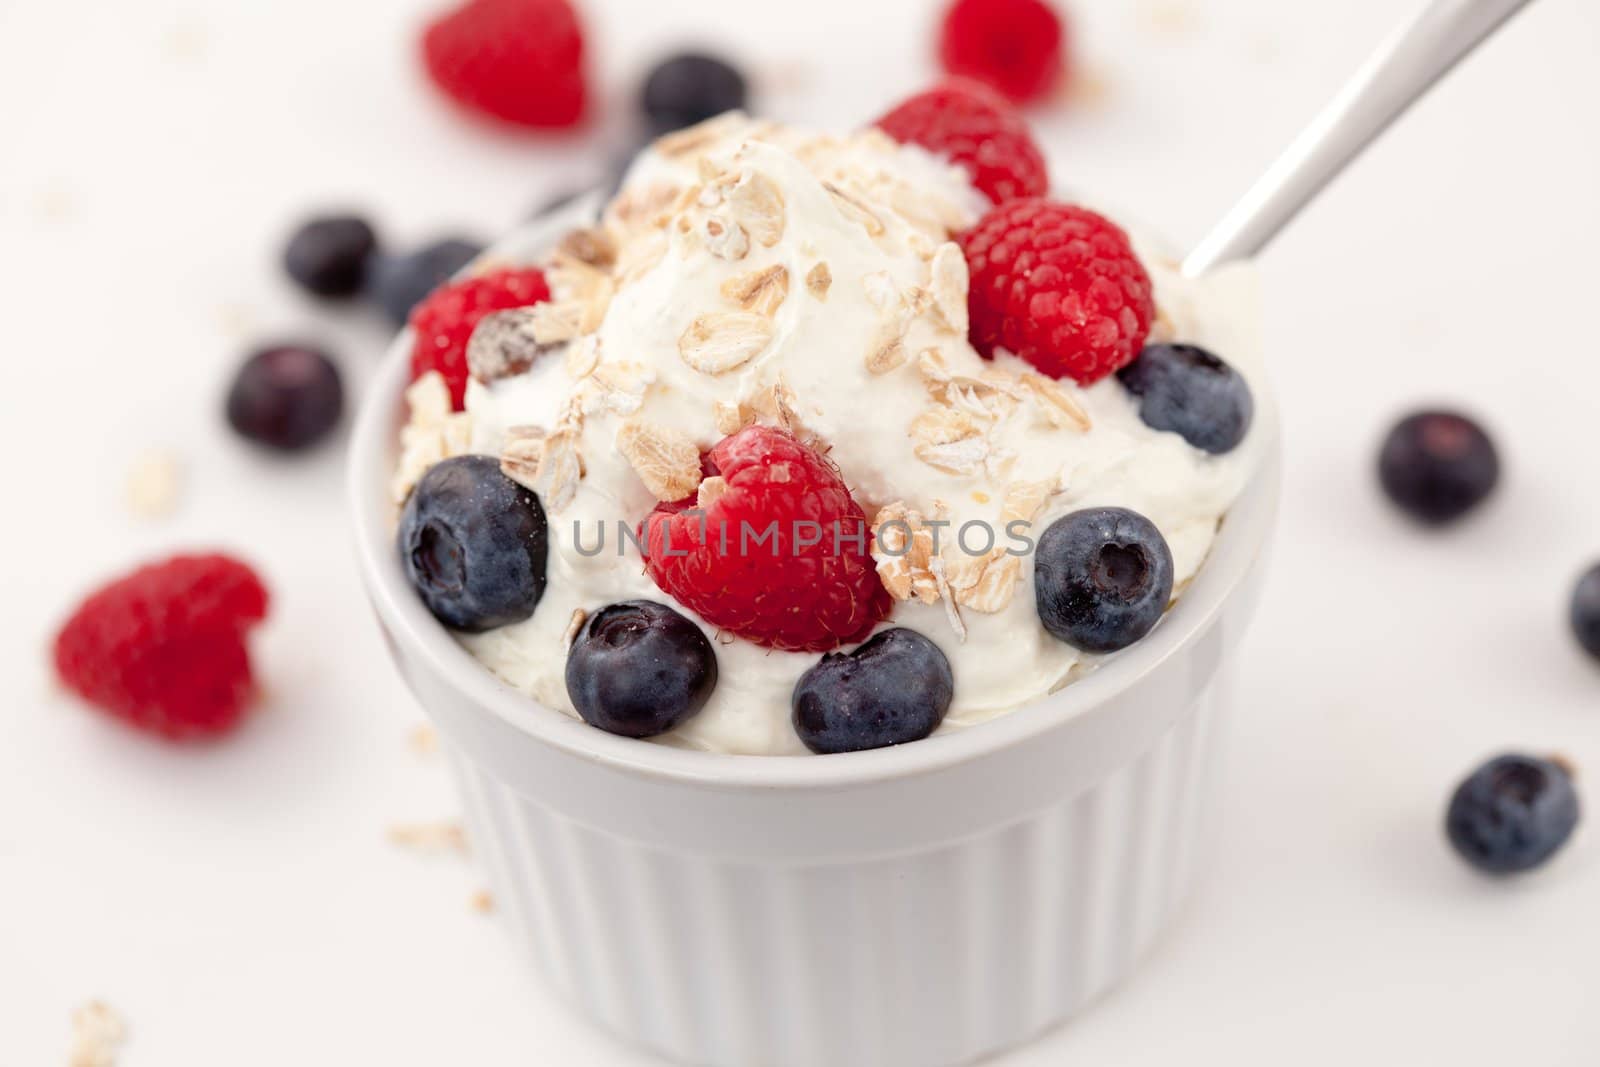 Sweet berries in whipped cream against white background